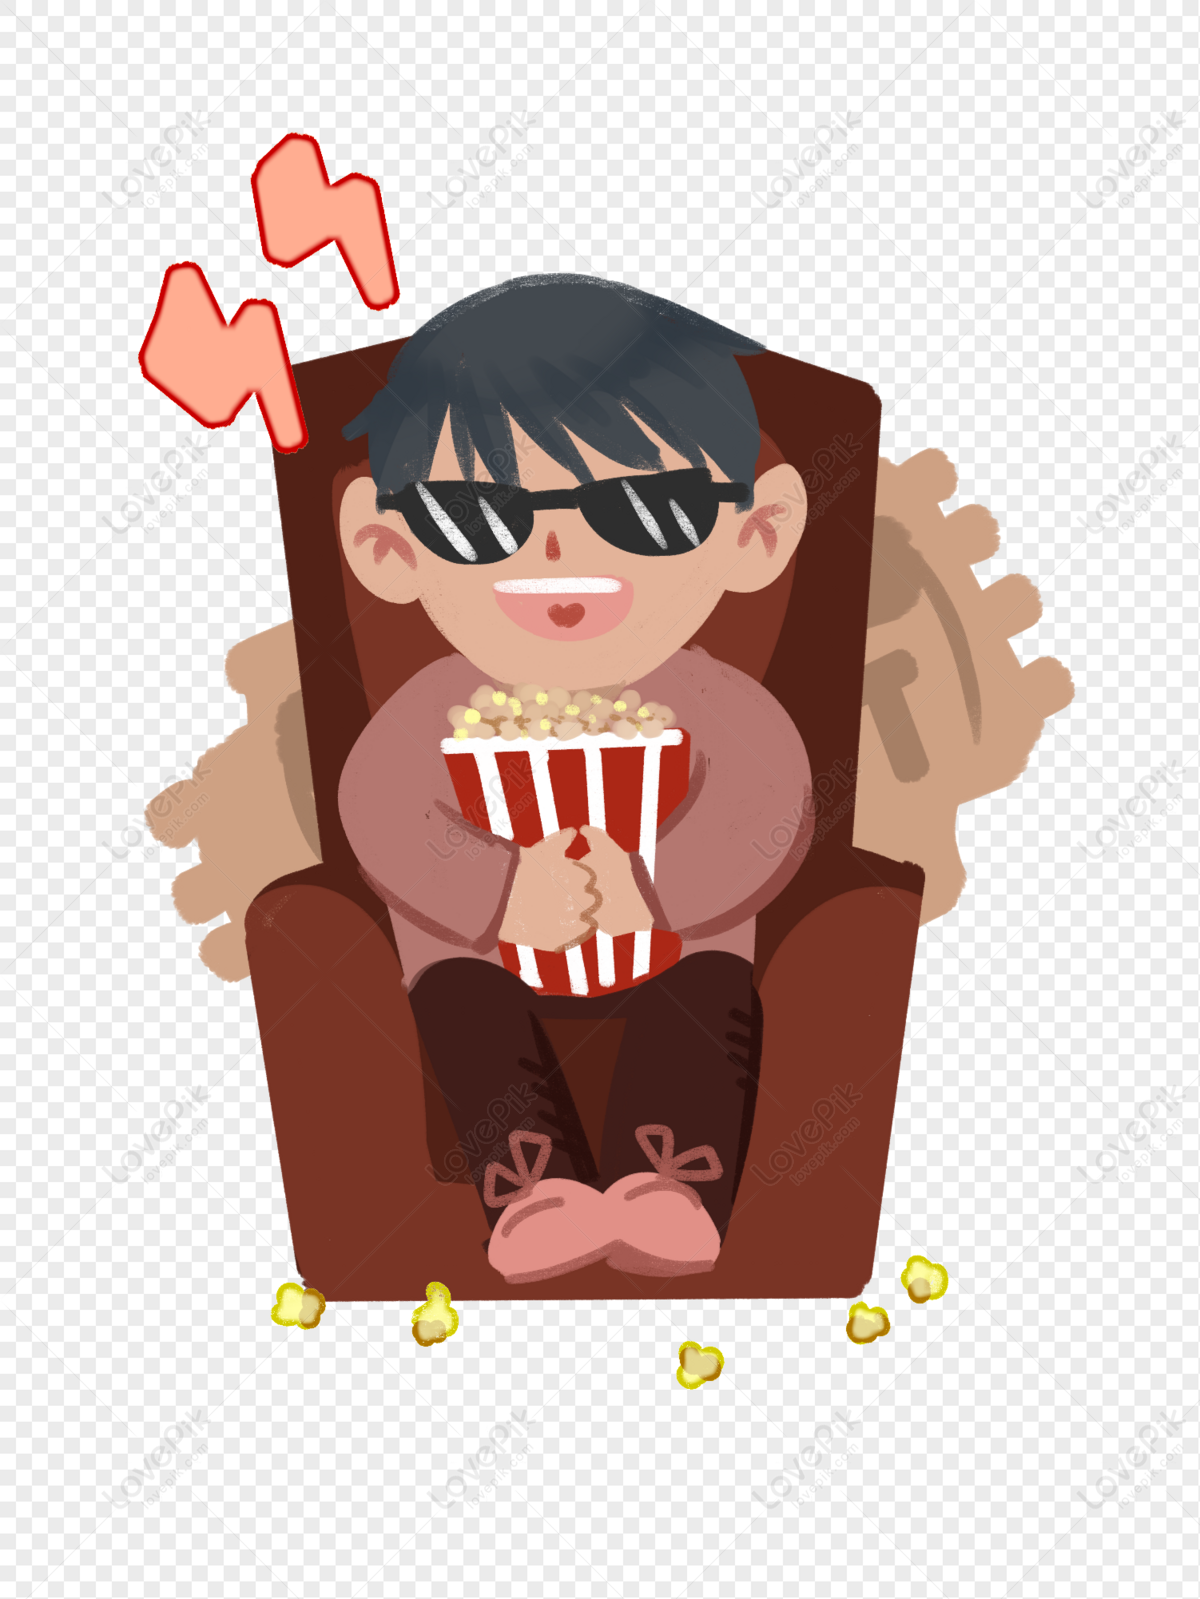 Eating Popcorn And Watching Movies PNG Hd Transparent Image And Clipart  Image For Free Download - Lovepik | 401344964